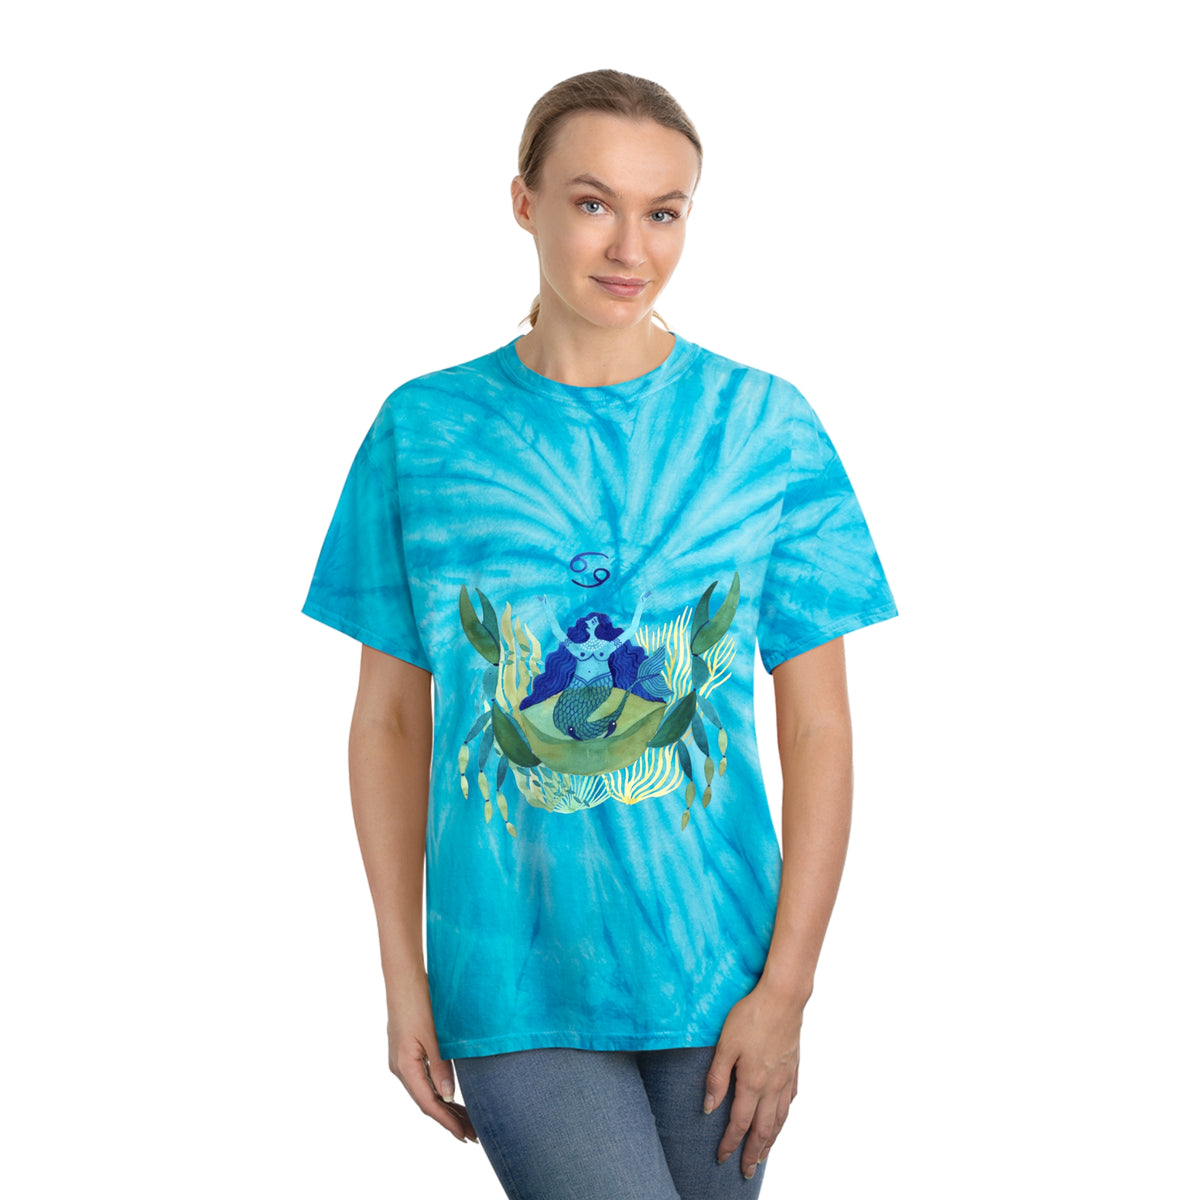 Cancer Cool: The Crab Tie Dye Tee